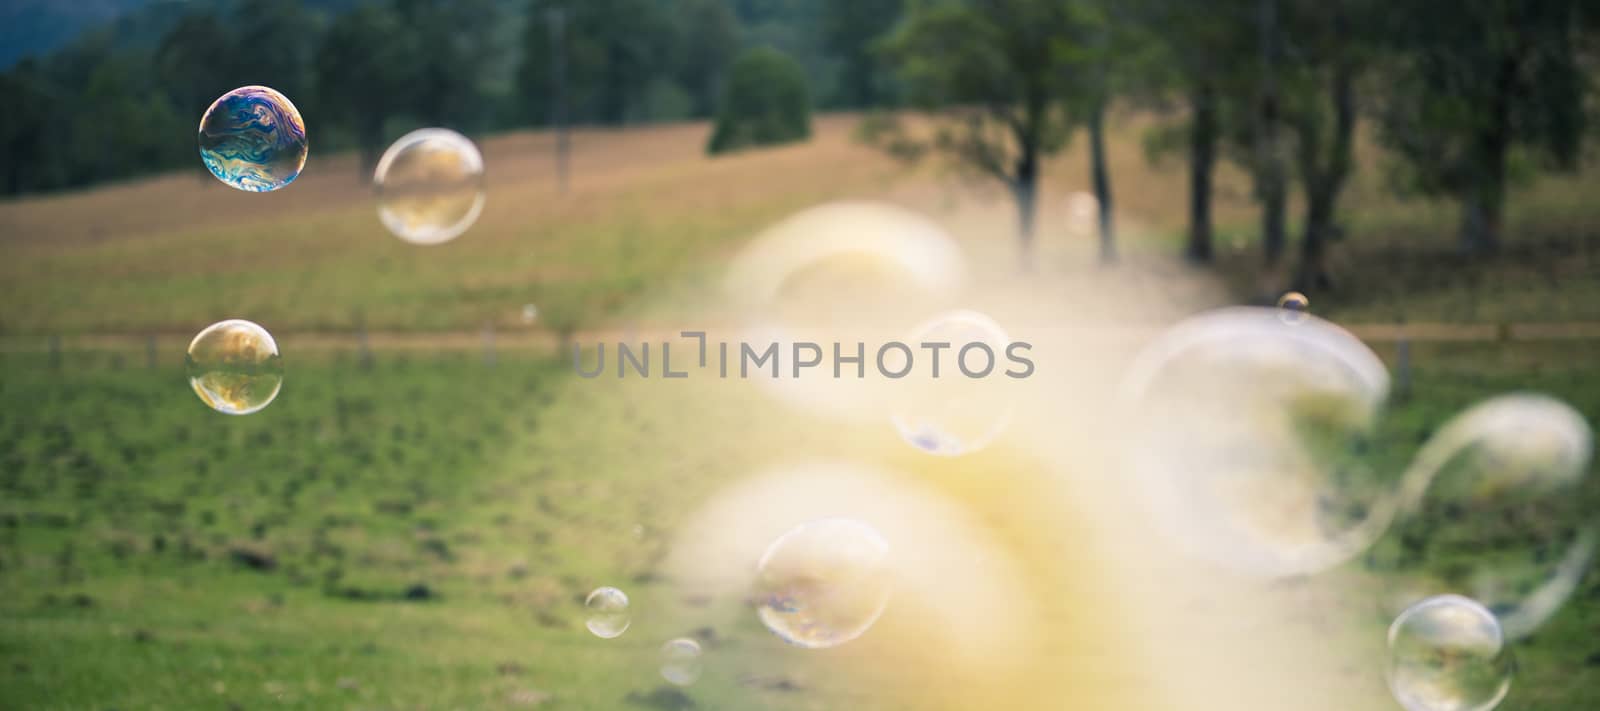 Bubbles in the air outside by artistrobd